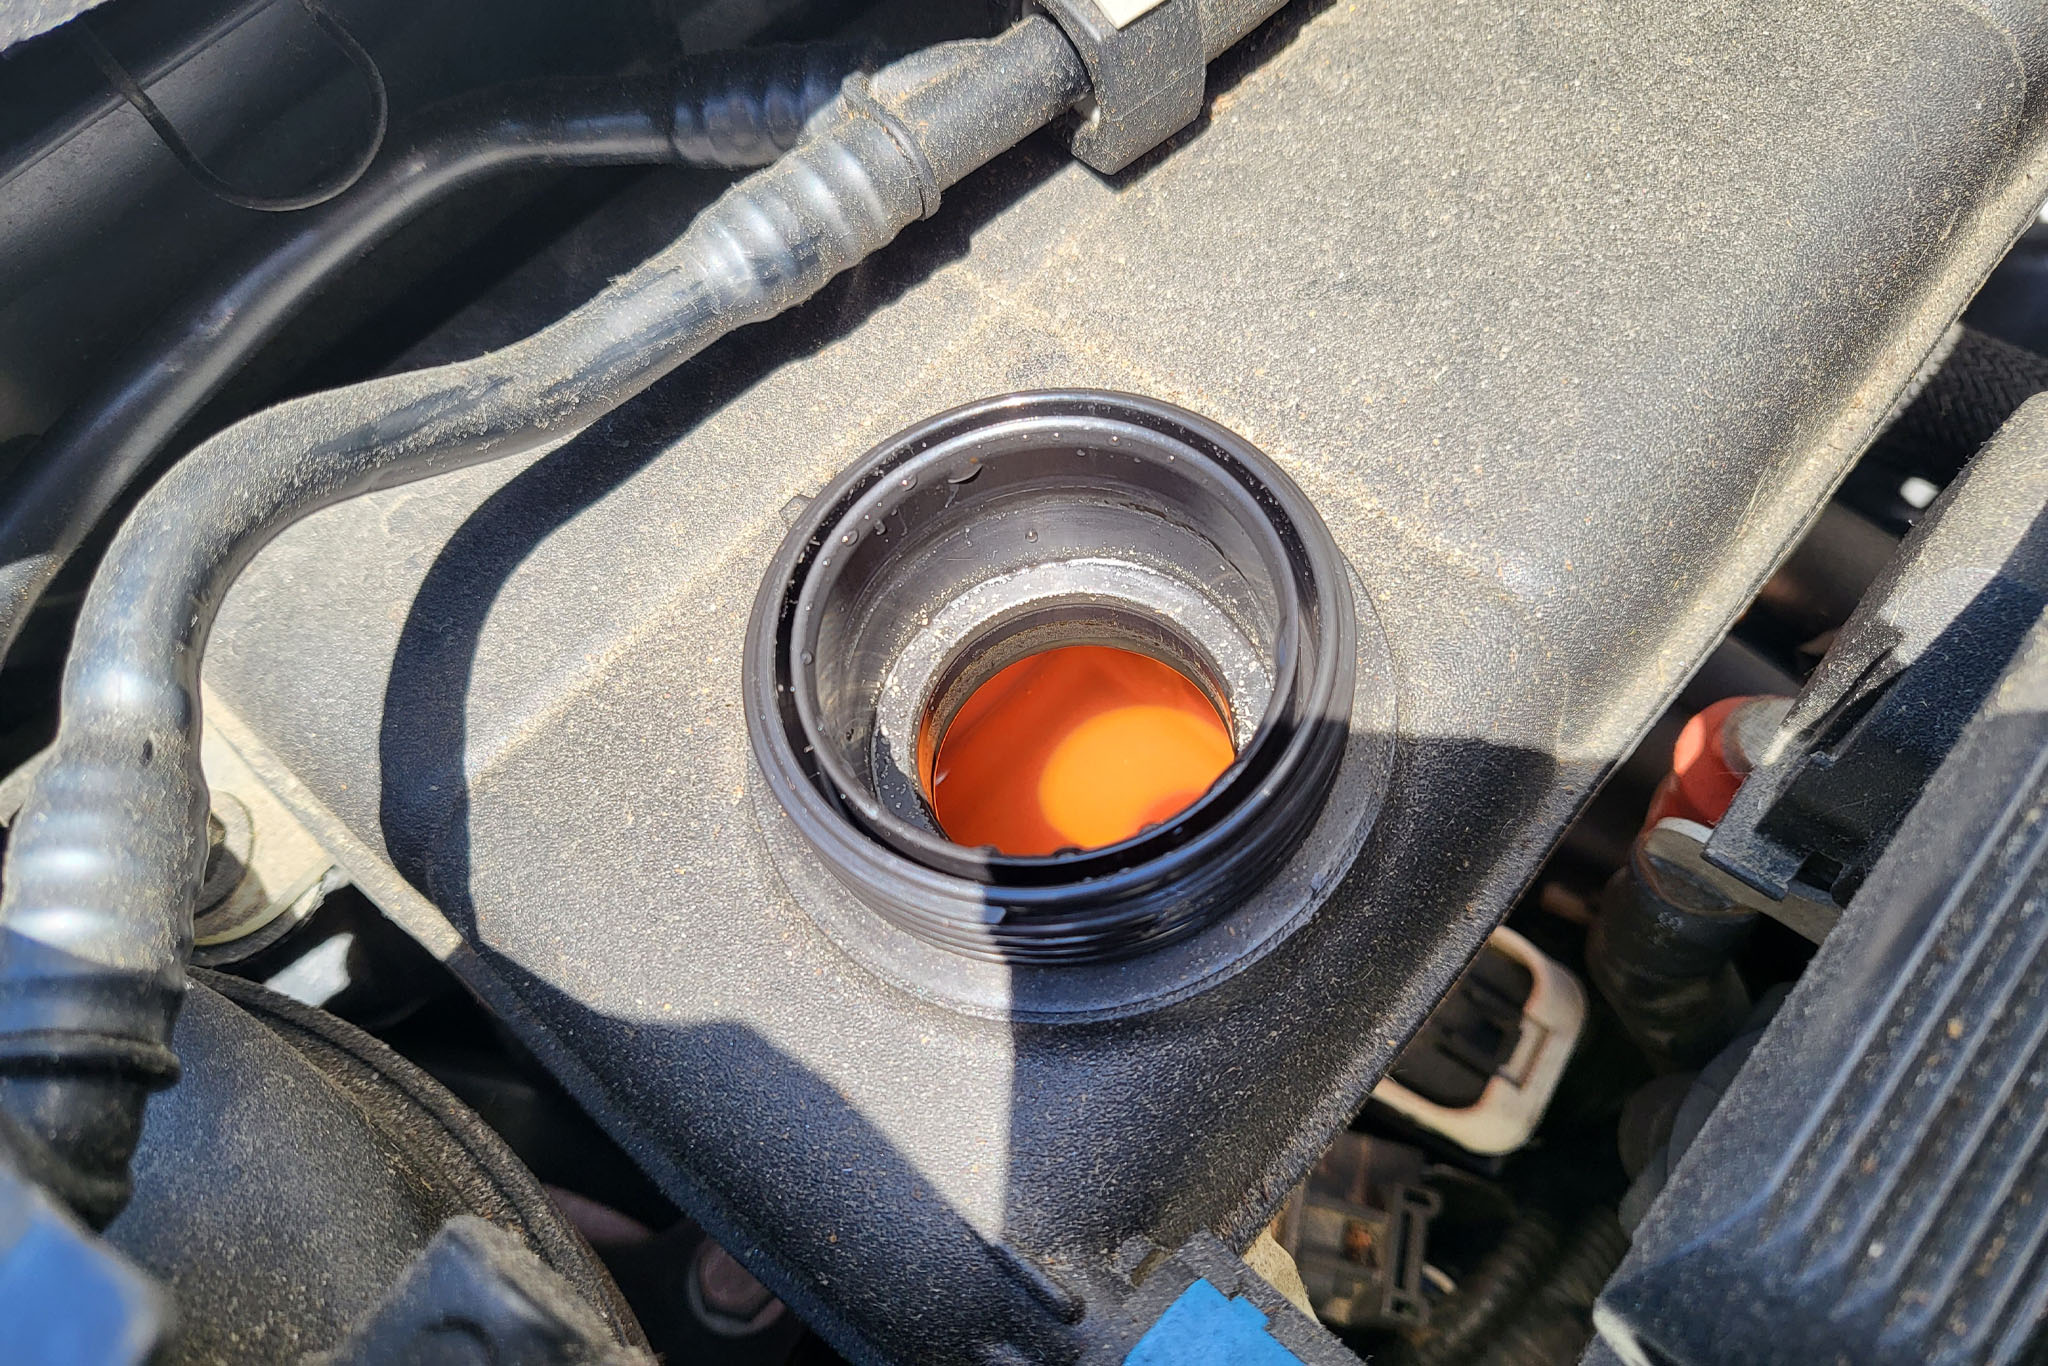 Checking the coolant level.